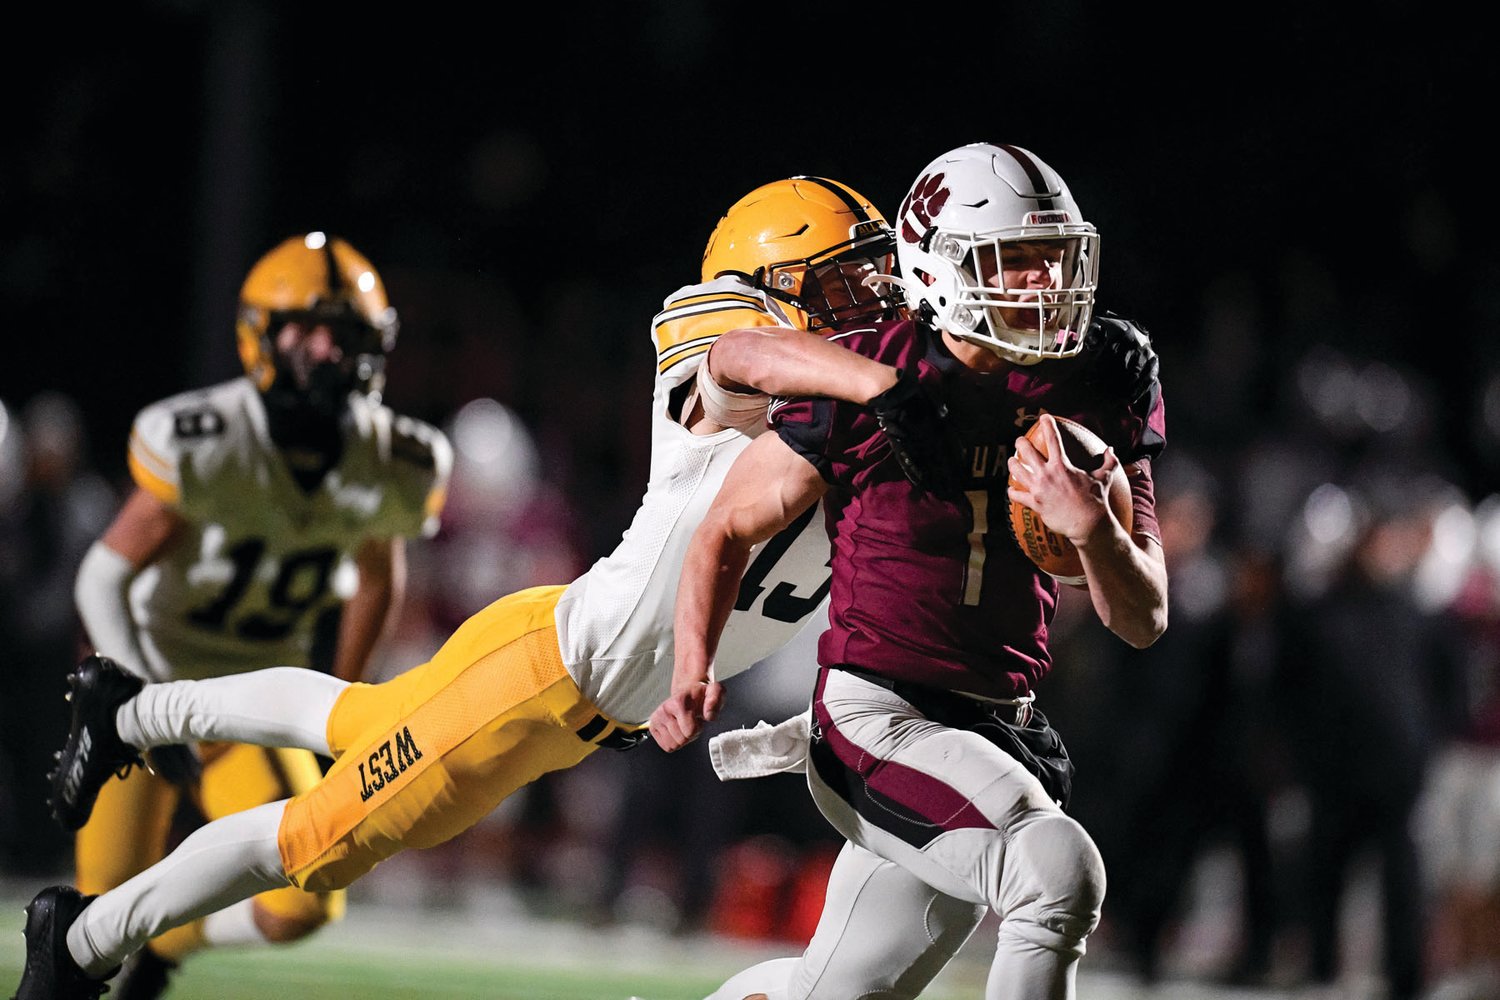 CB West’s Sean Blue leaps on the back of Garnet Valley’s Matthew Mesaros after a long quarterback scramble during the District One 6A final. Garnet Valley defeated the Bucks 35-7.